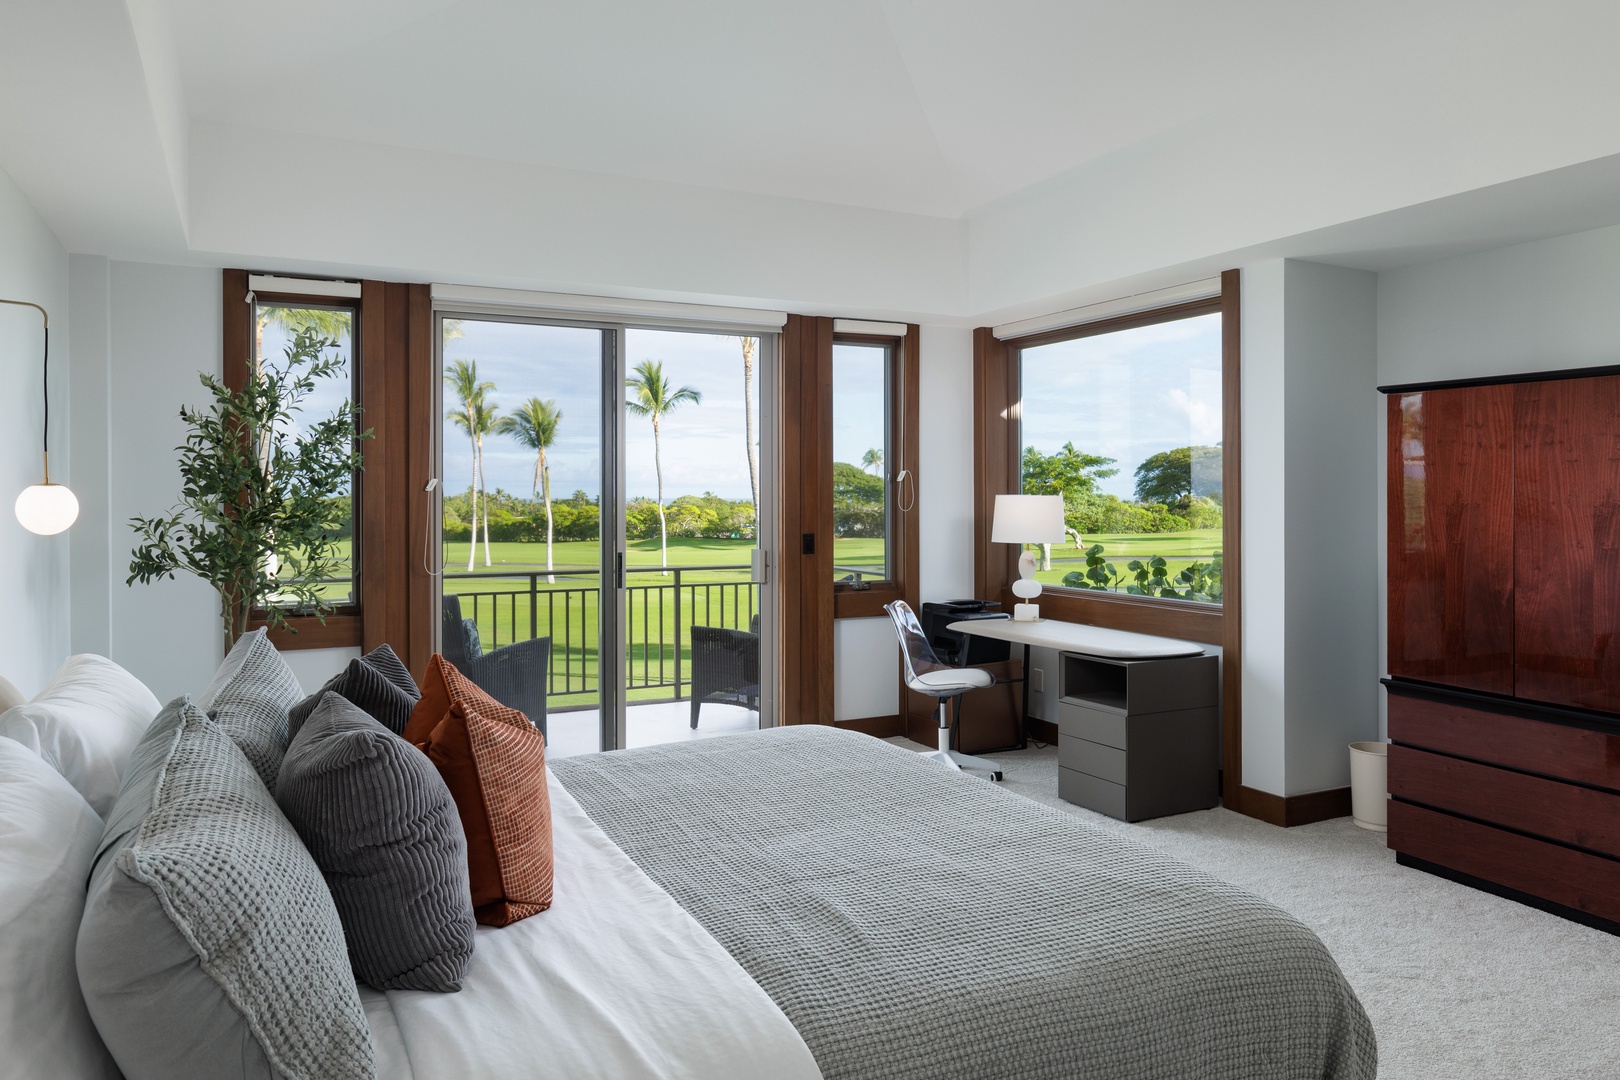 Kailua Kona Vacation Rentals, 3BD Fairways Villa (104A) at Four Seasons Resort at Hualalai - The primary guest suite with a king bed and a dedicated home office with a front seat view of the outdoors.